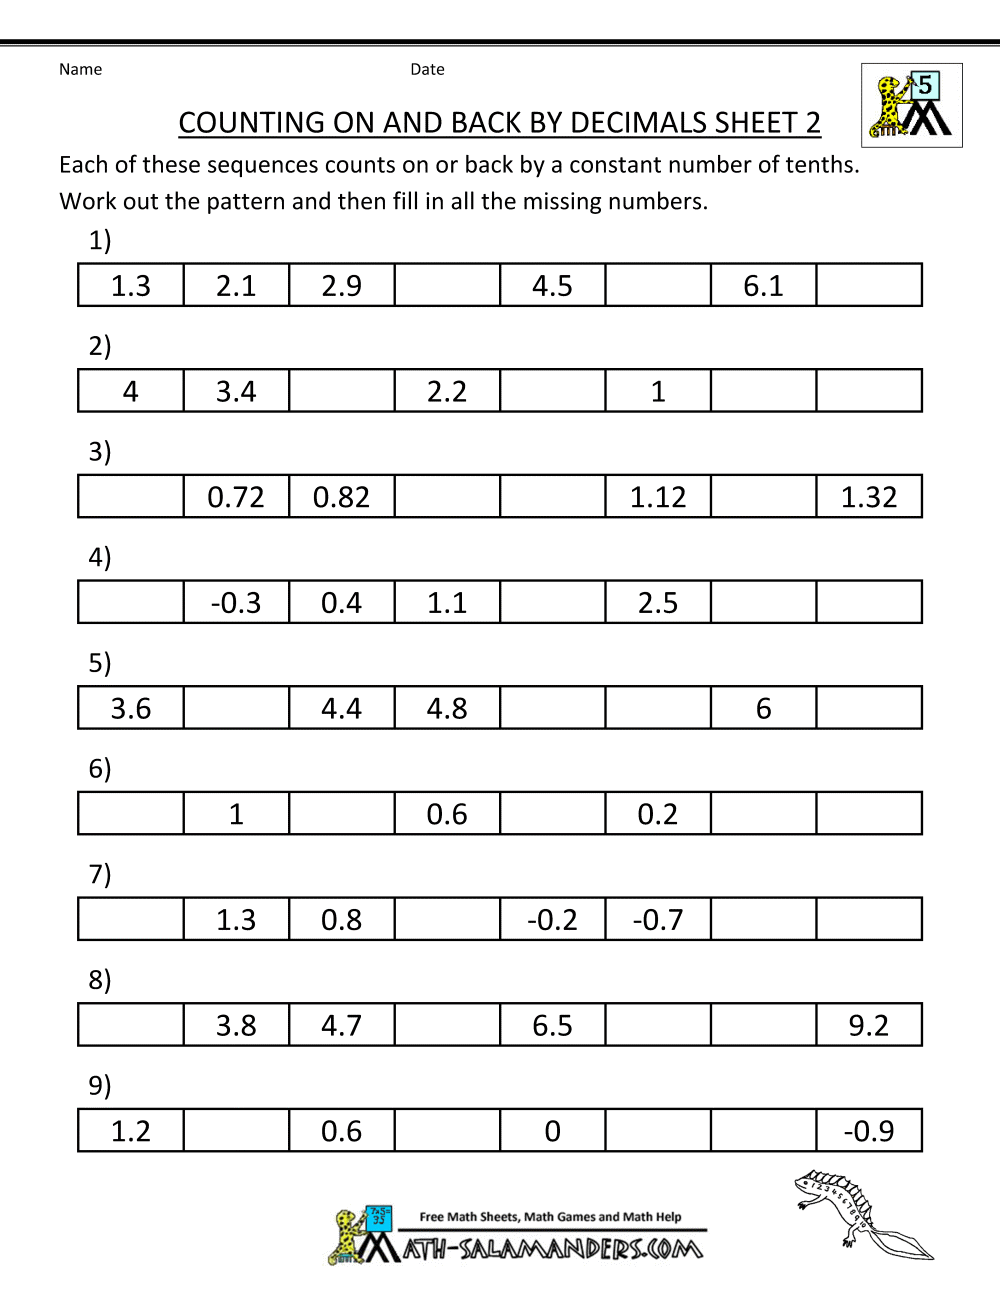 Counting By Decimals multiplication, worksheets, learning, printable worksheets, and free worksheets Composite And Prime Numbers Worksheets 2 1294 x 1000